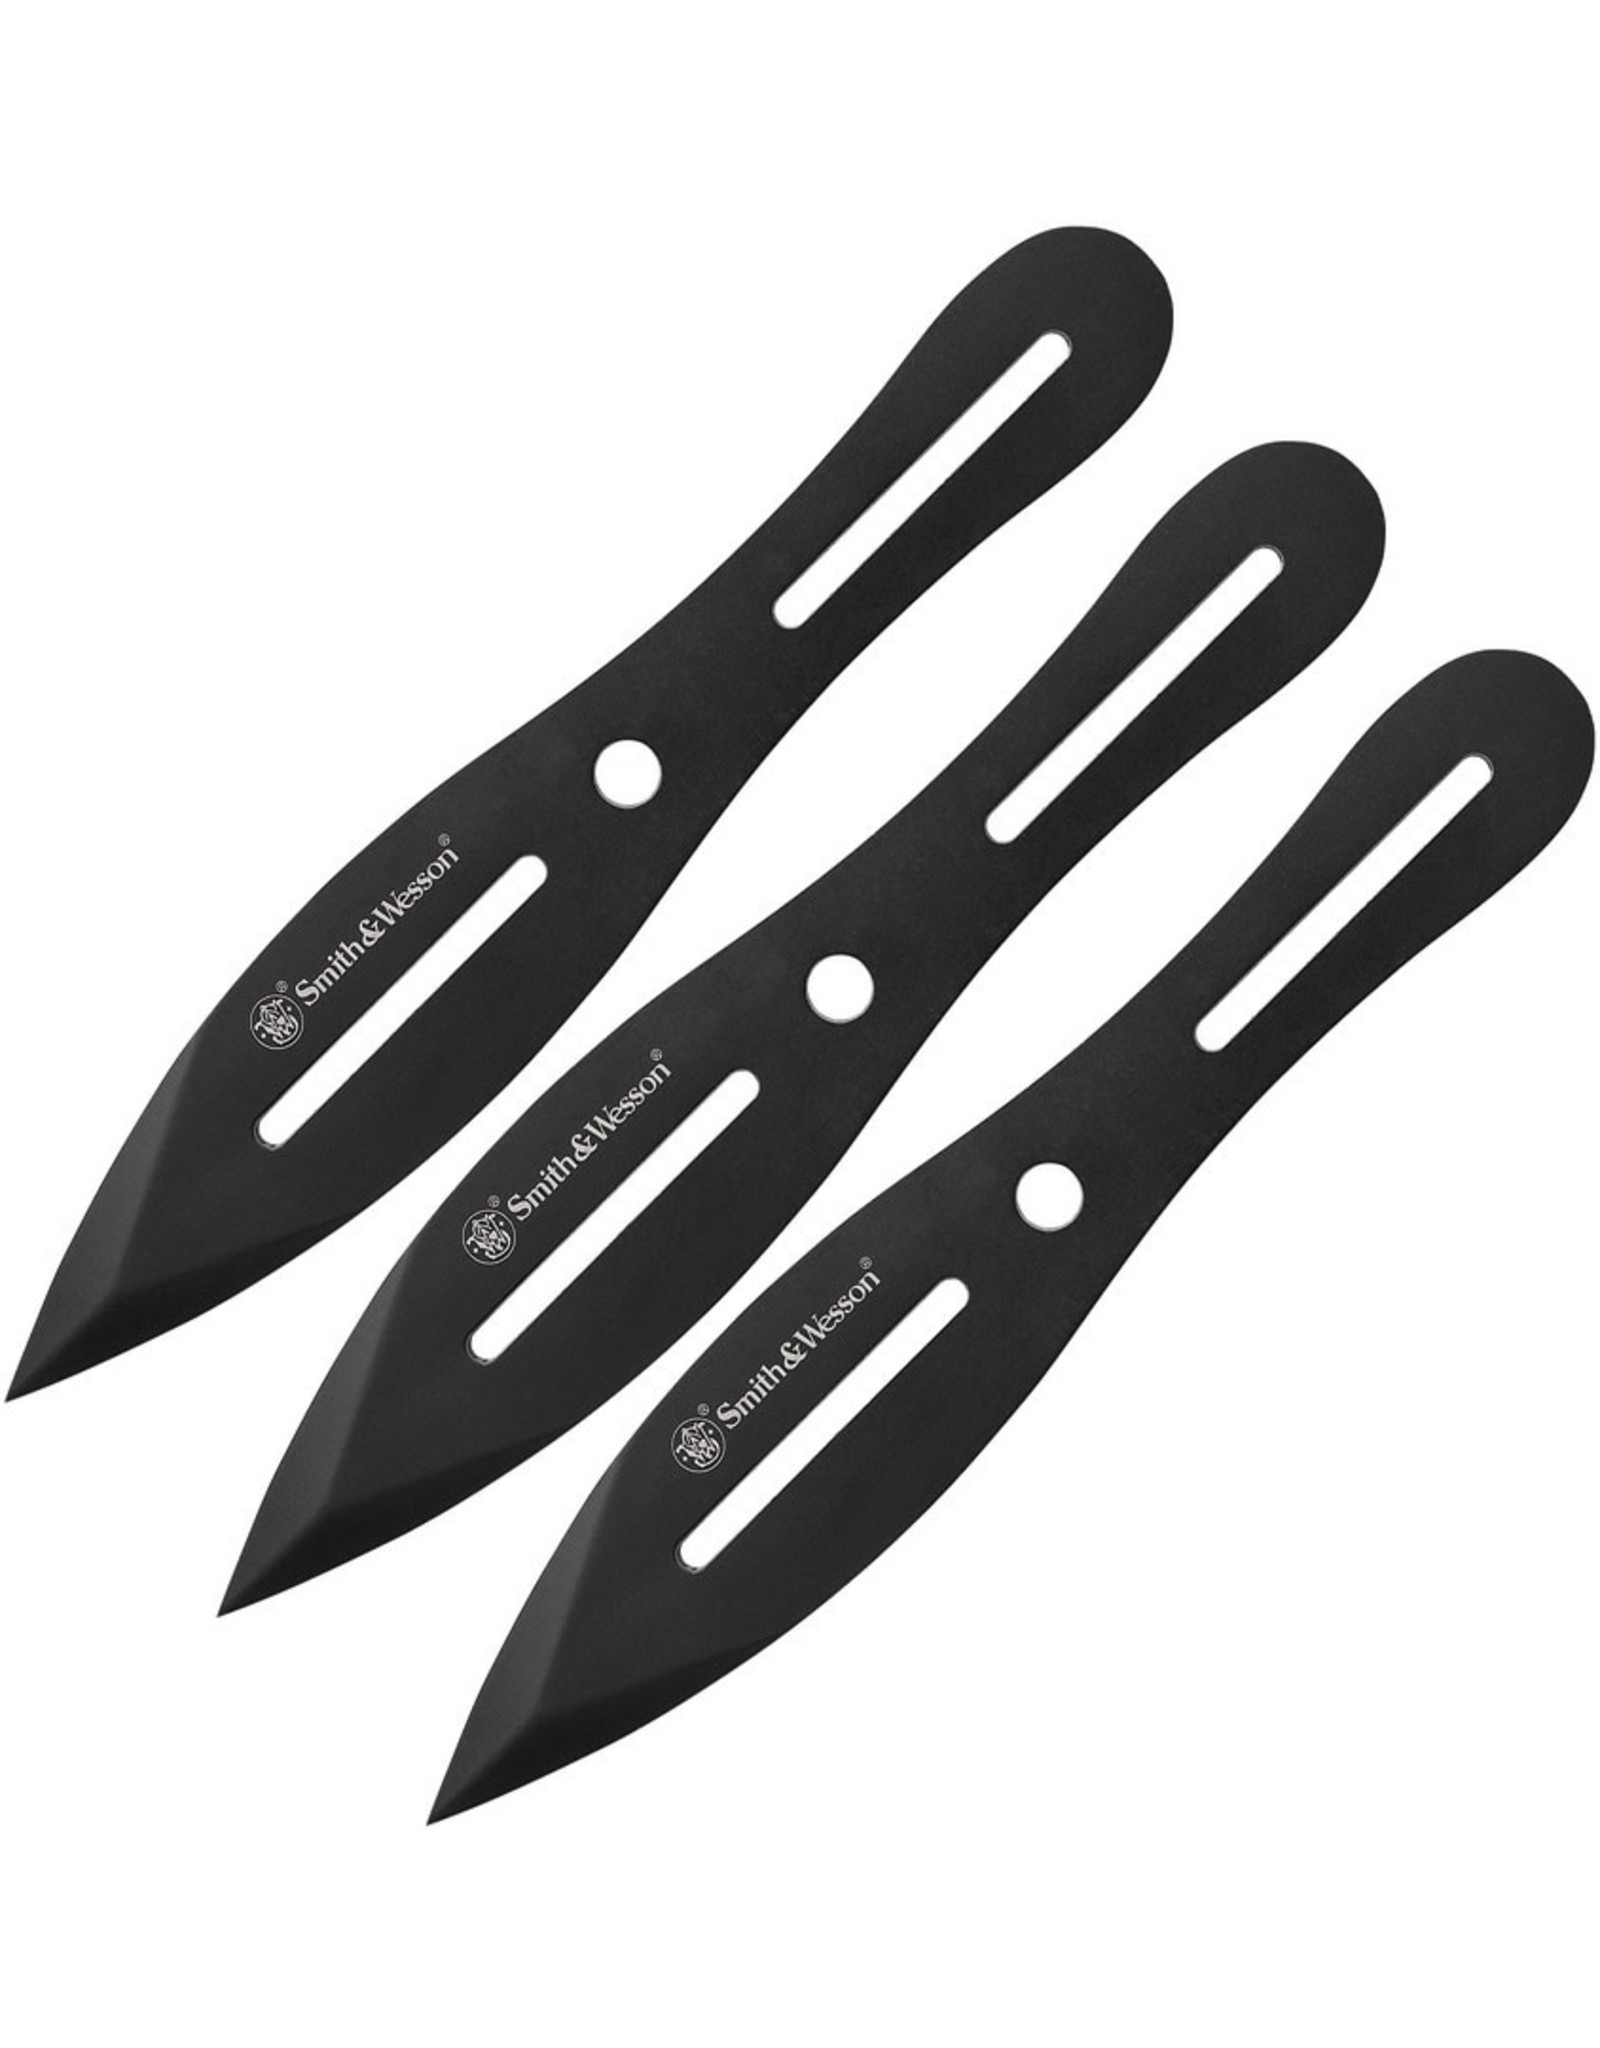 Smith & Wesson Smith & Wesson SWTK8BCP 3 Pack 8" Throwing Knives